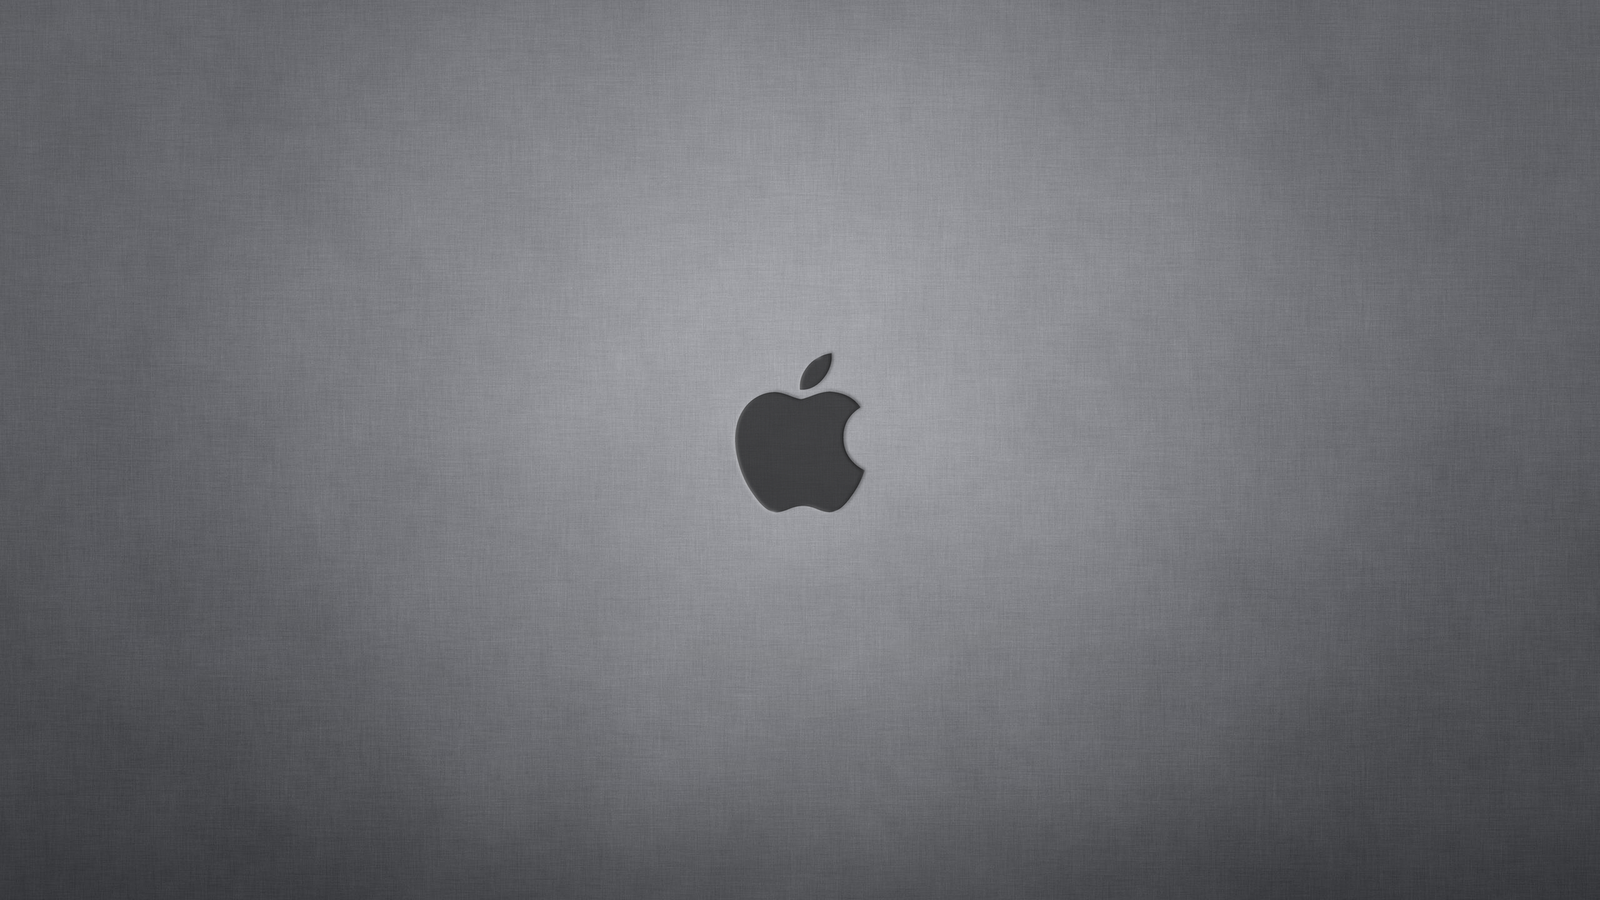 Super HD Mac Os X Lion Apple Wallpaper With Black And Silver Colour